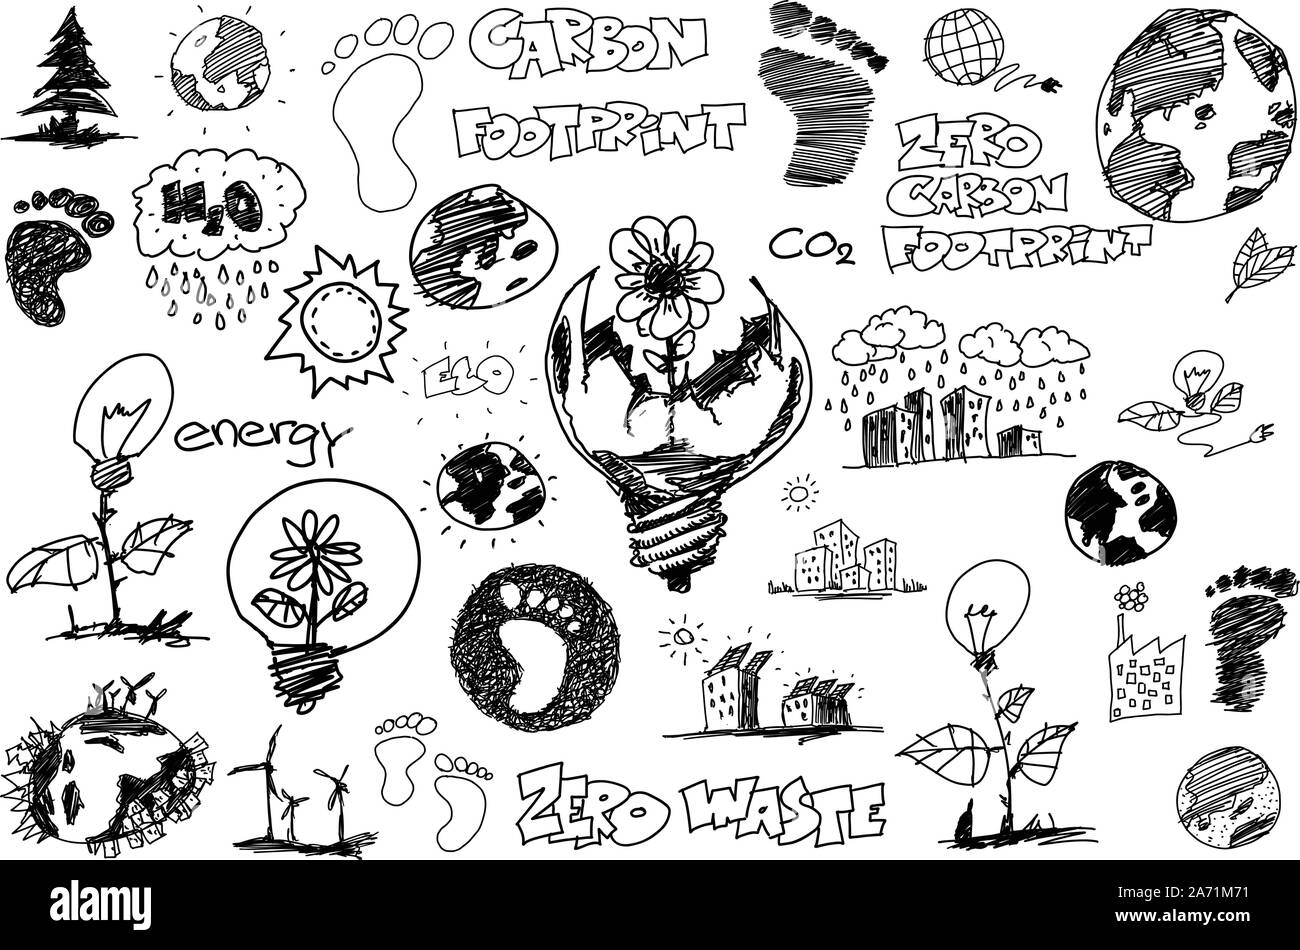 many sketches and doodles regarding nature and carbon footprint and environment Stock Vector